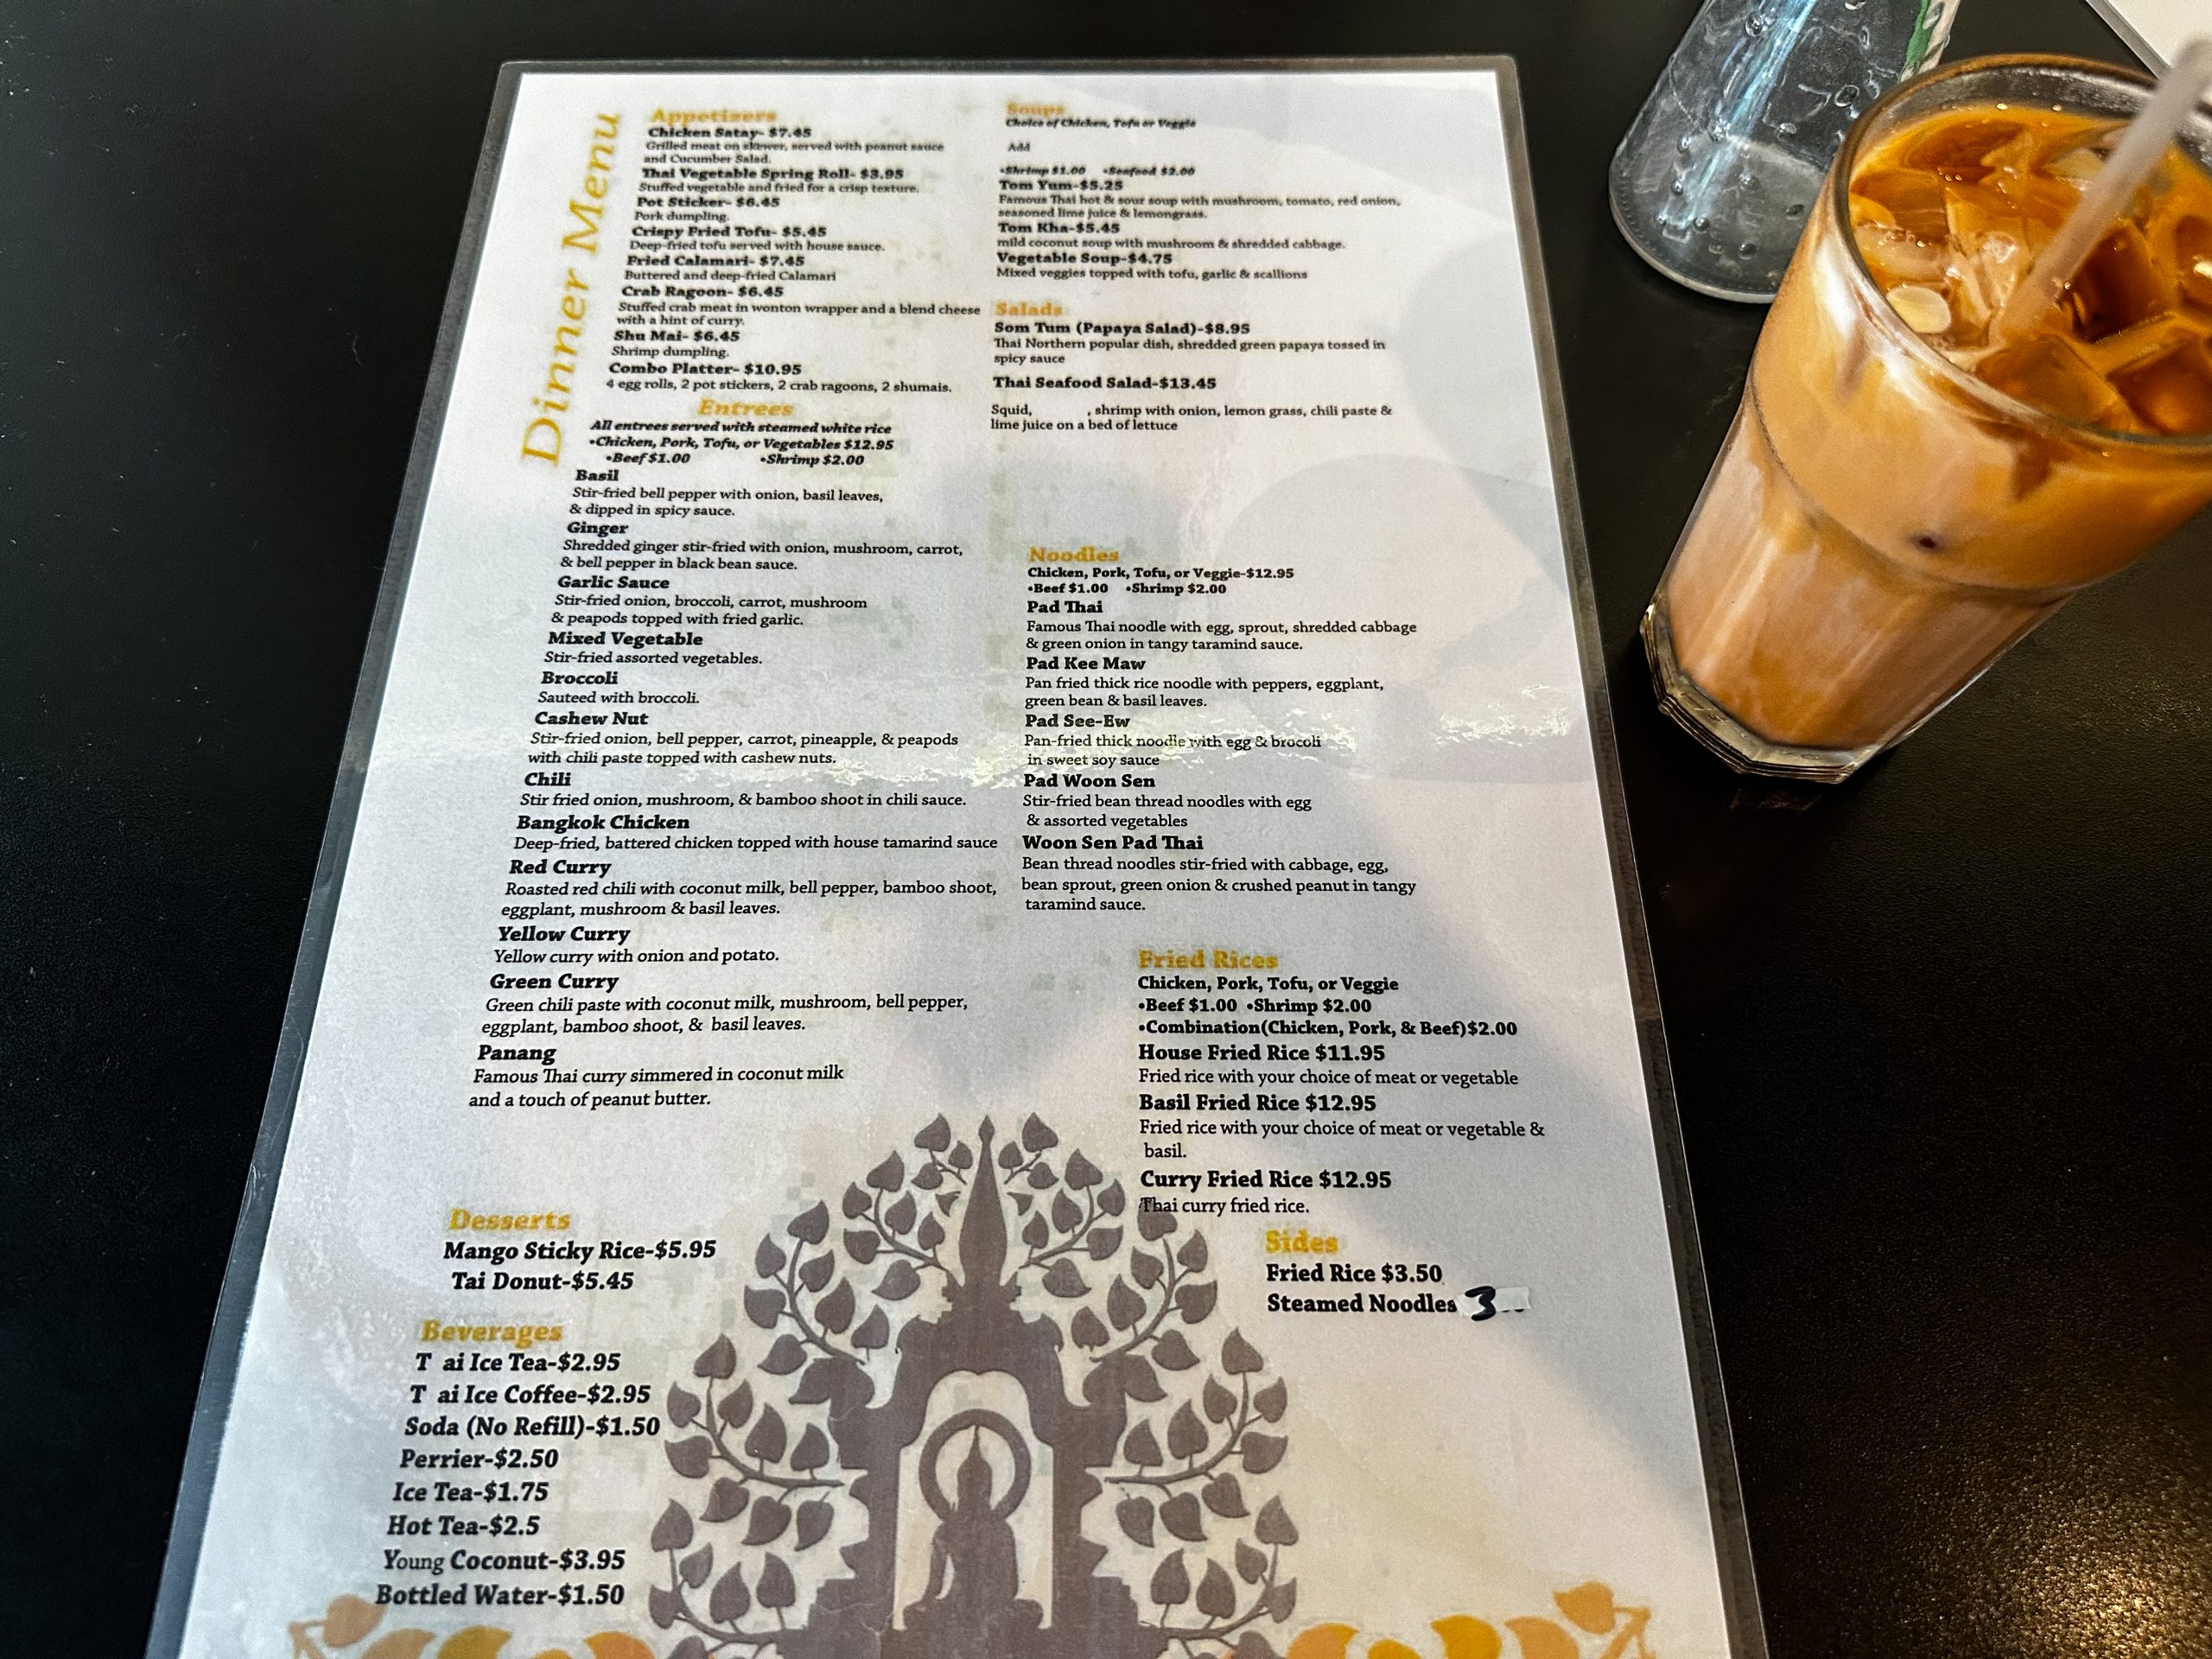 A glance at the dinner menu